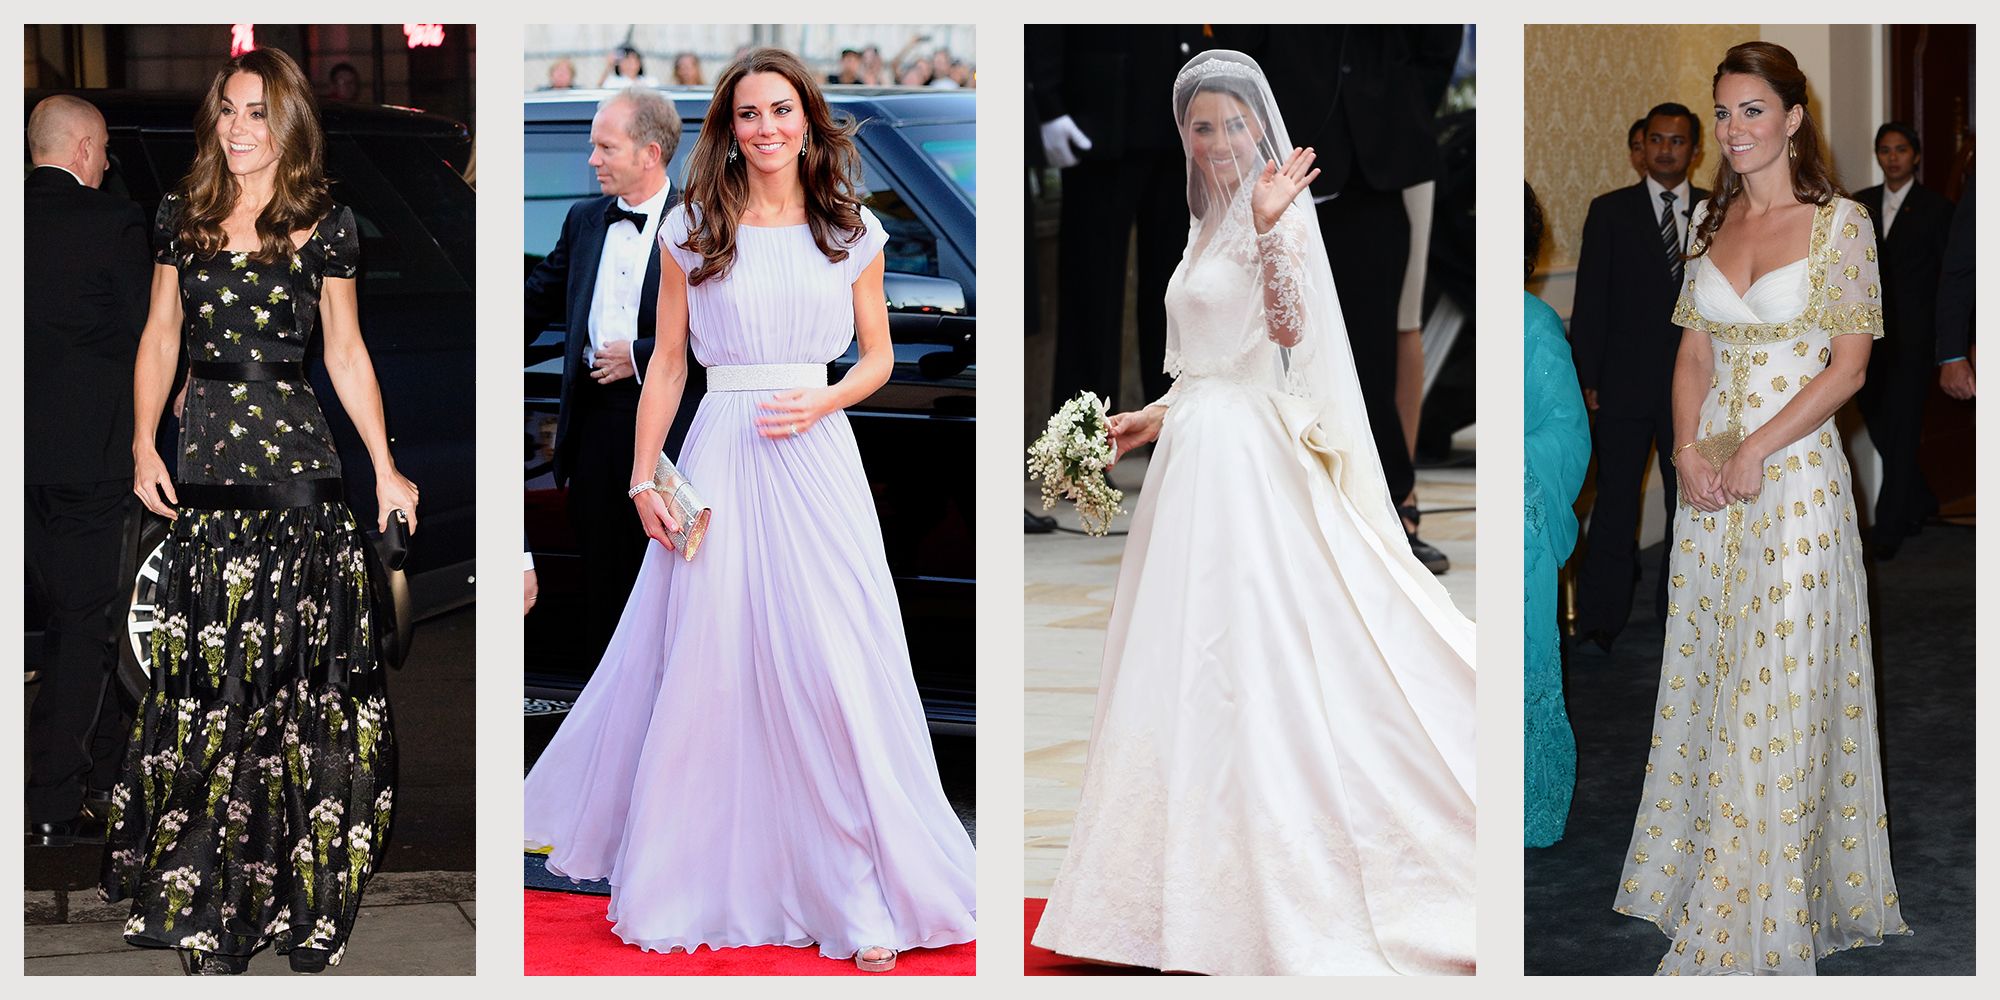 Kate Middleton repeats yellow gown. | Kate middleton style outfits,  Princess kate middleton, Princess kate style